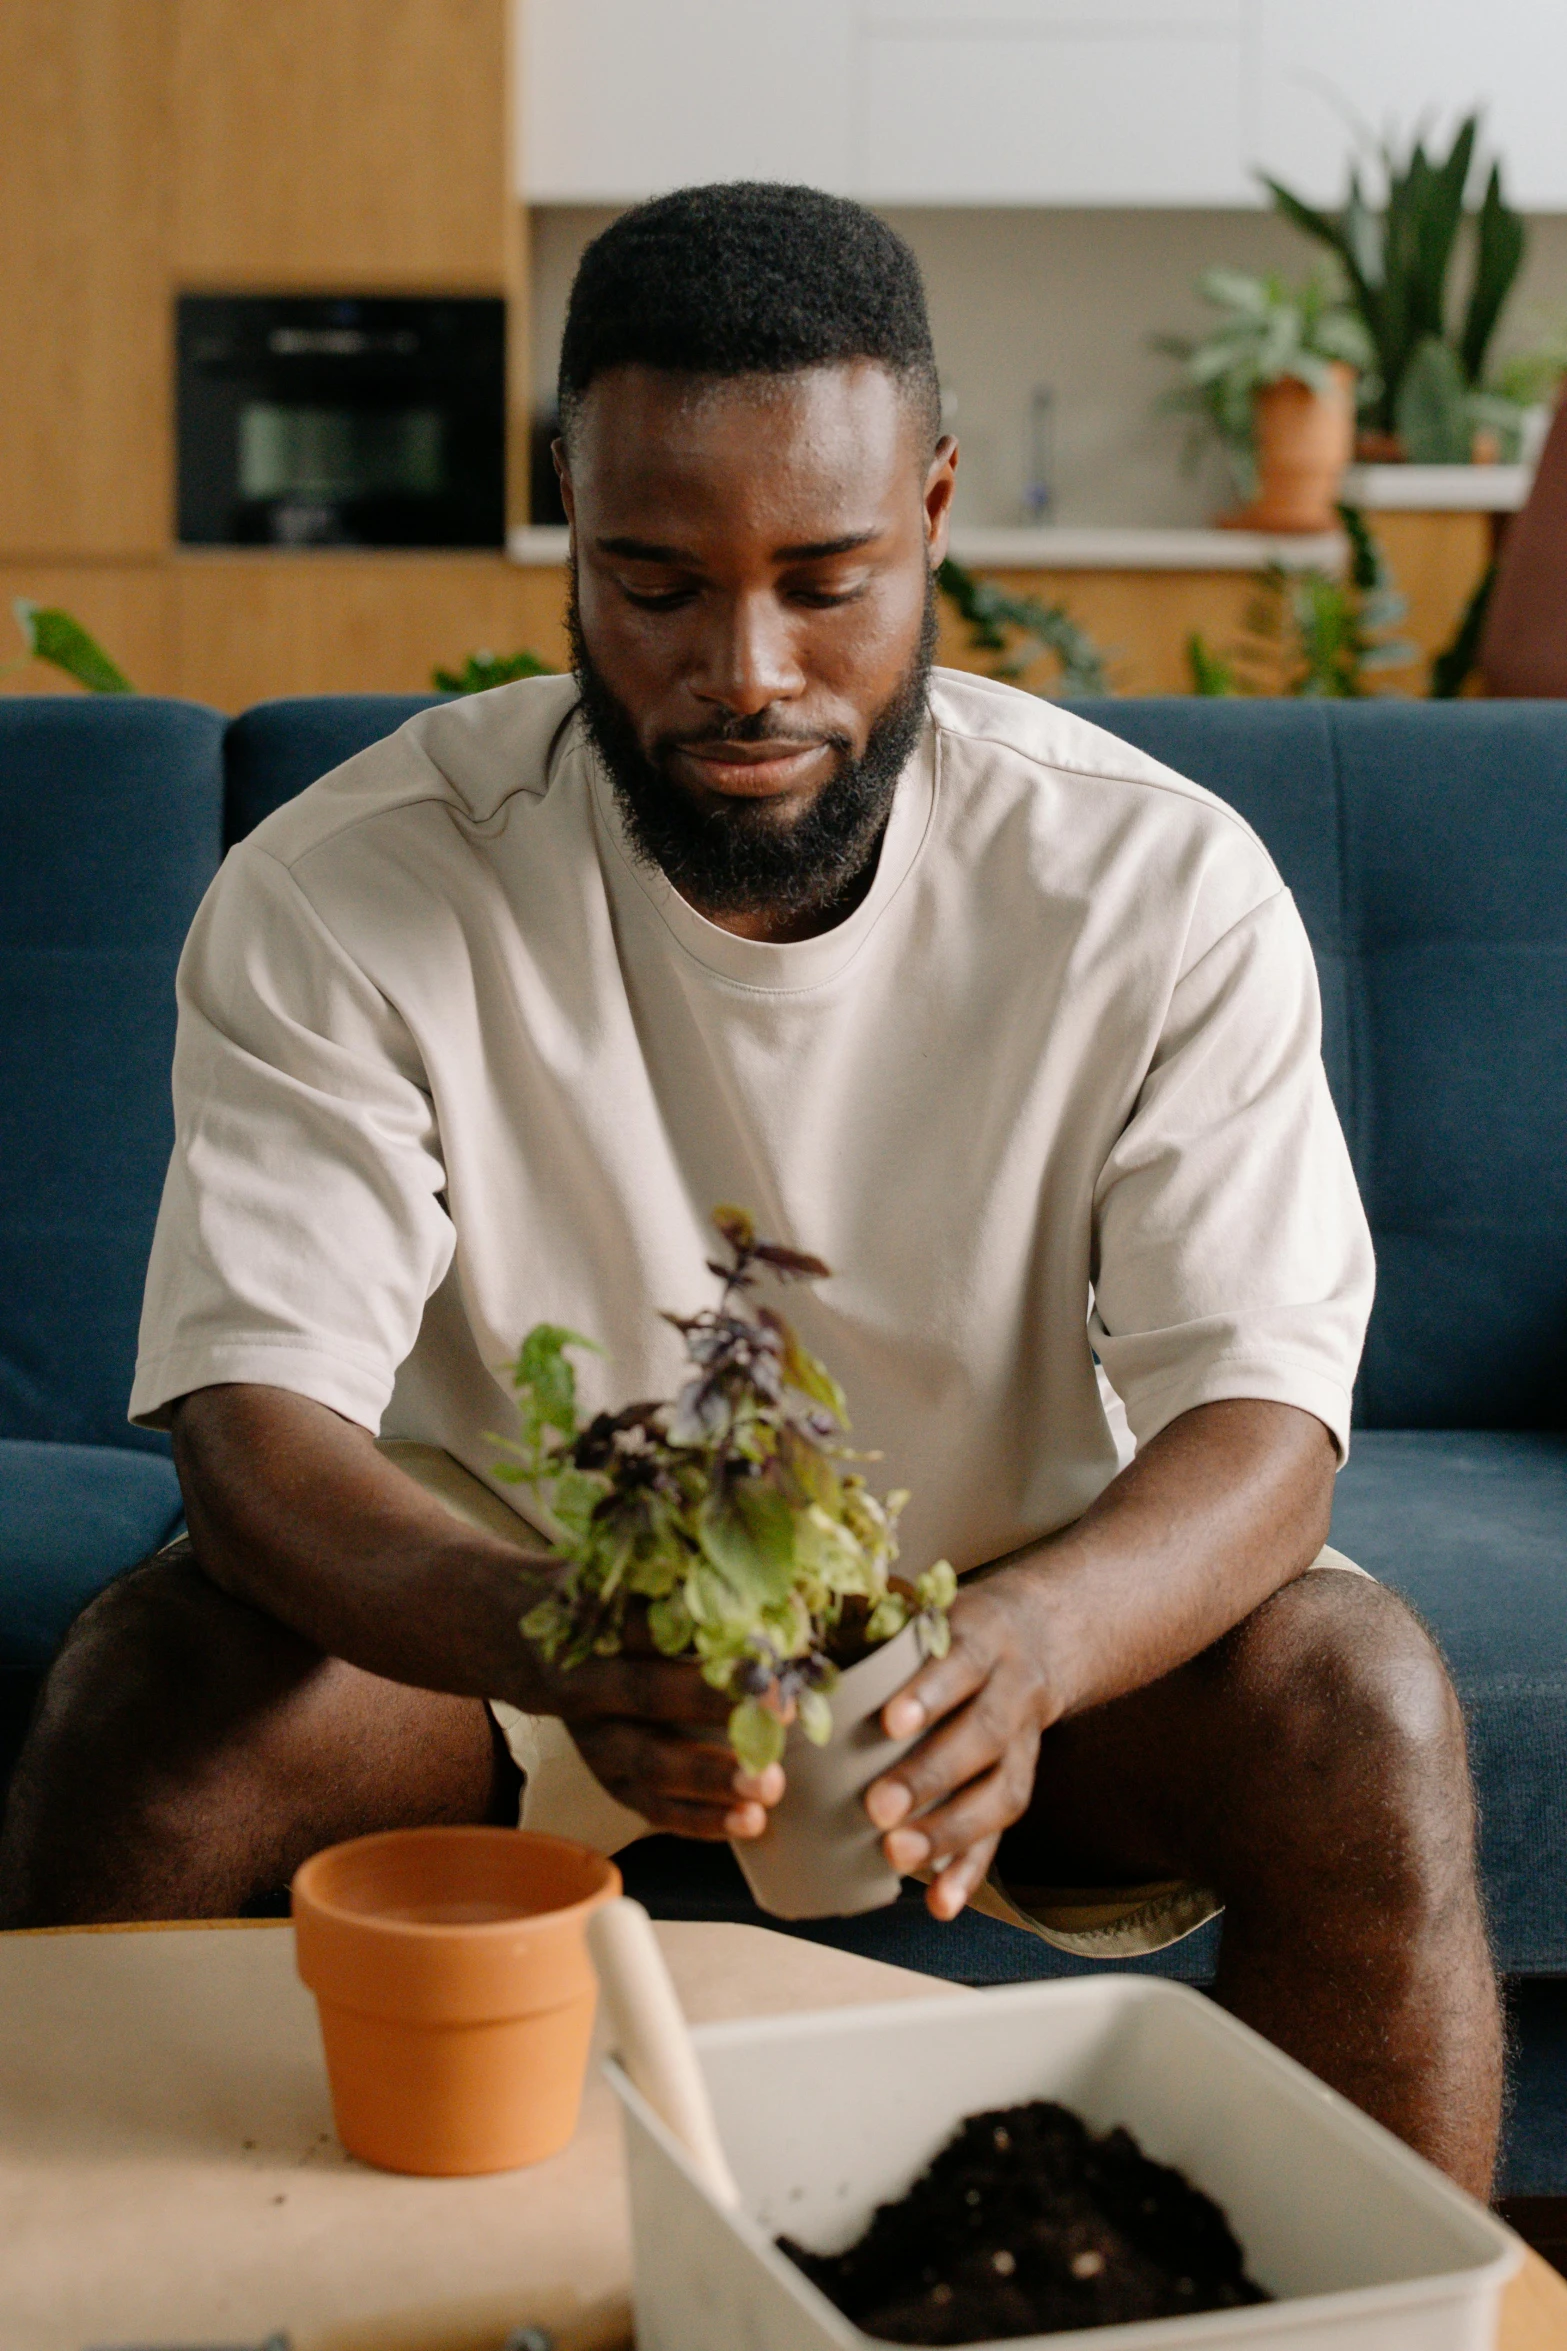 a man sitting on a couch holding a plant, pexels contest winner, renaissance, cutting a salad, black man, mc ride, planters